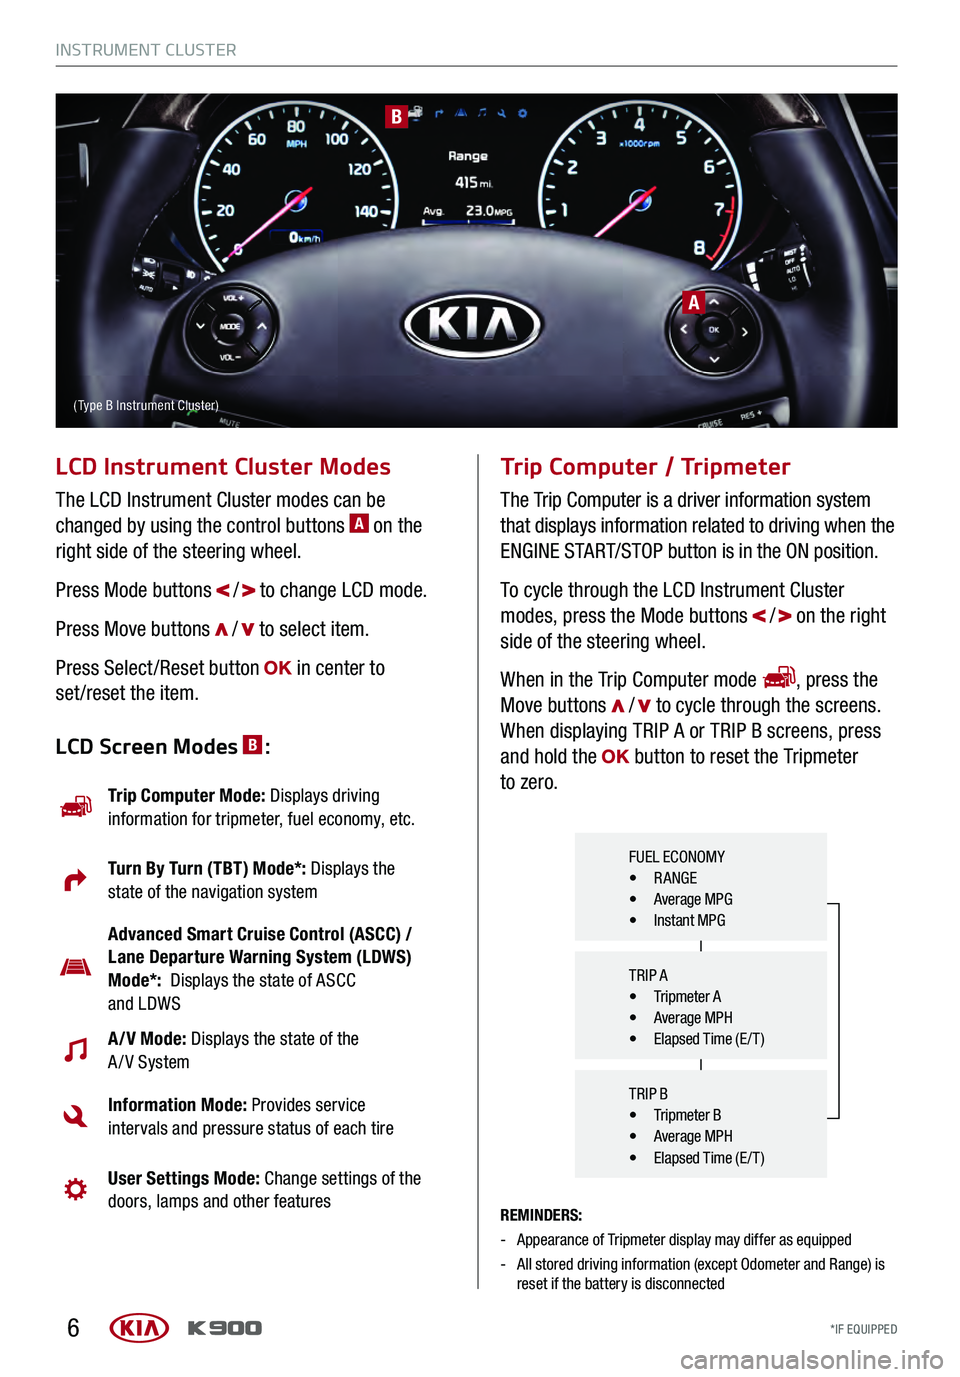 KIA K900 2017  Features and Functions Guide 6
A
B
LCD Instrument Cluster Modes
The LCD Instrument Cluster modes can be 
changed by using the control buttons A on the 
right side of the steering wheel. 
Press Mode buttons 
 /  to change LCD mode